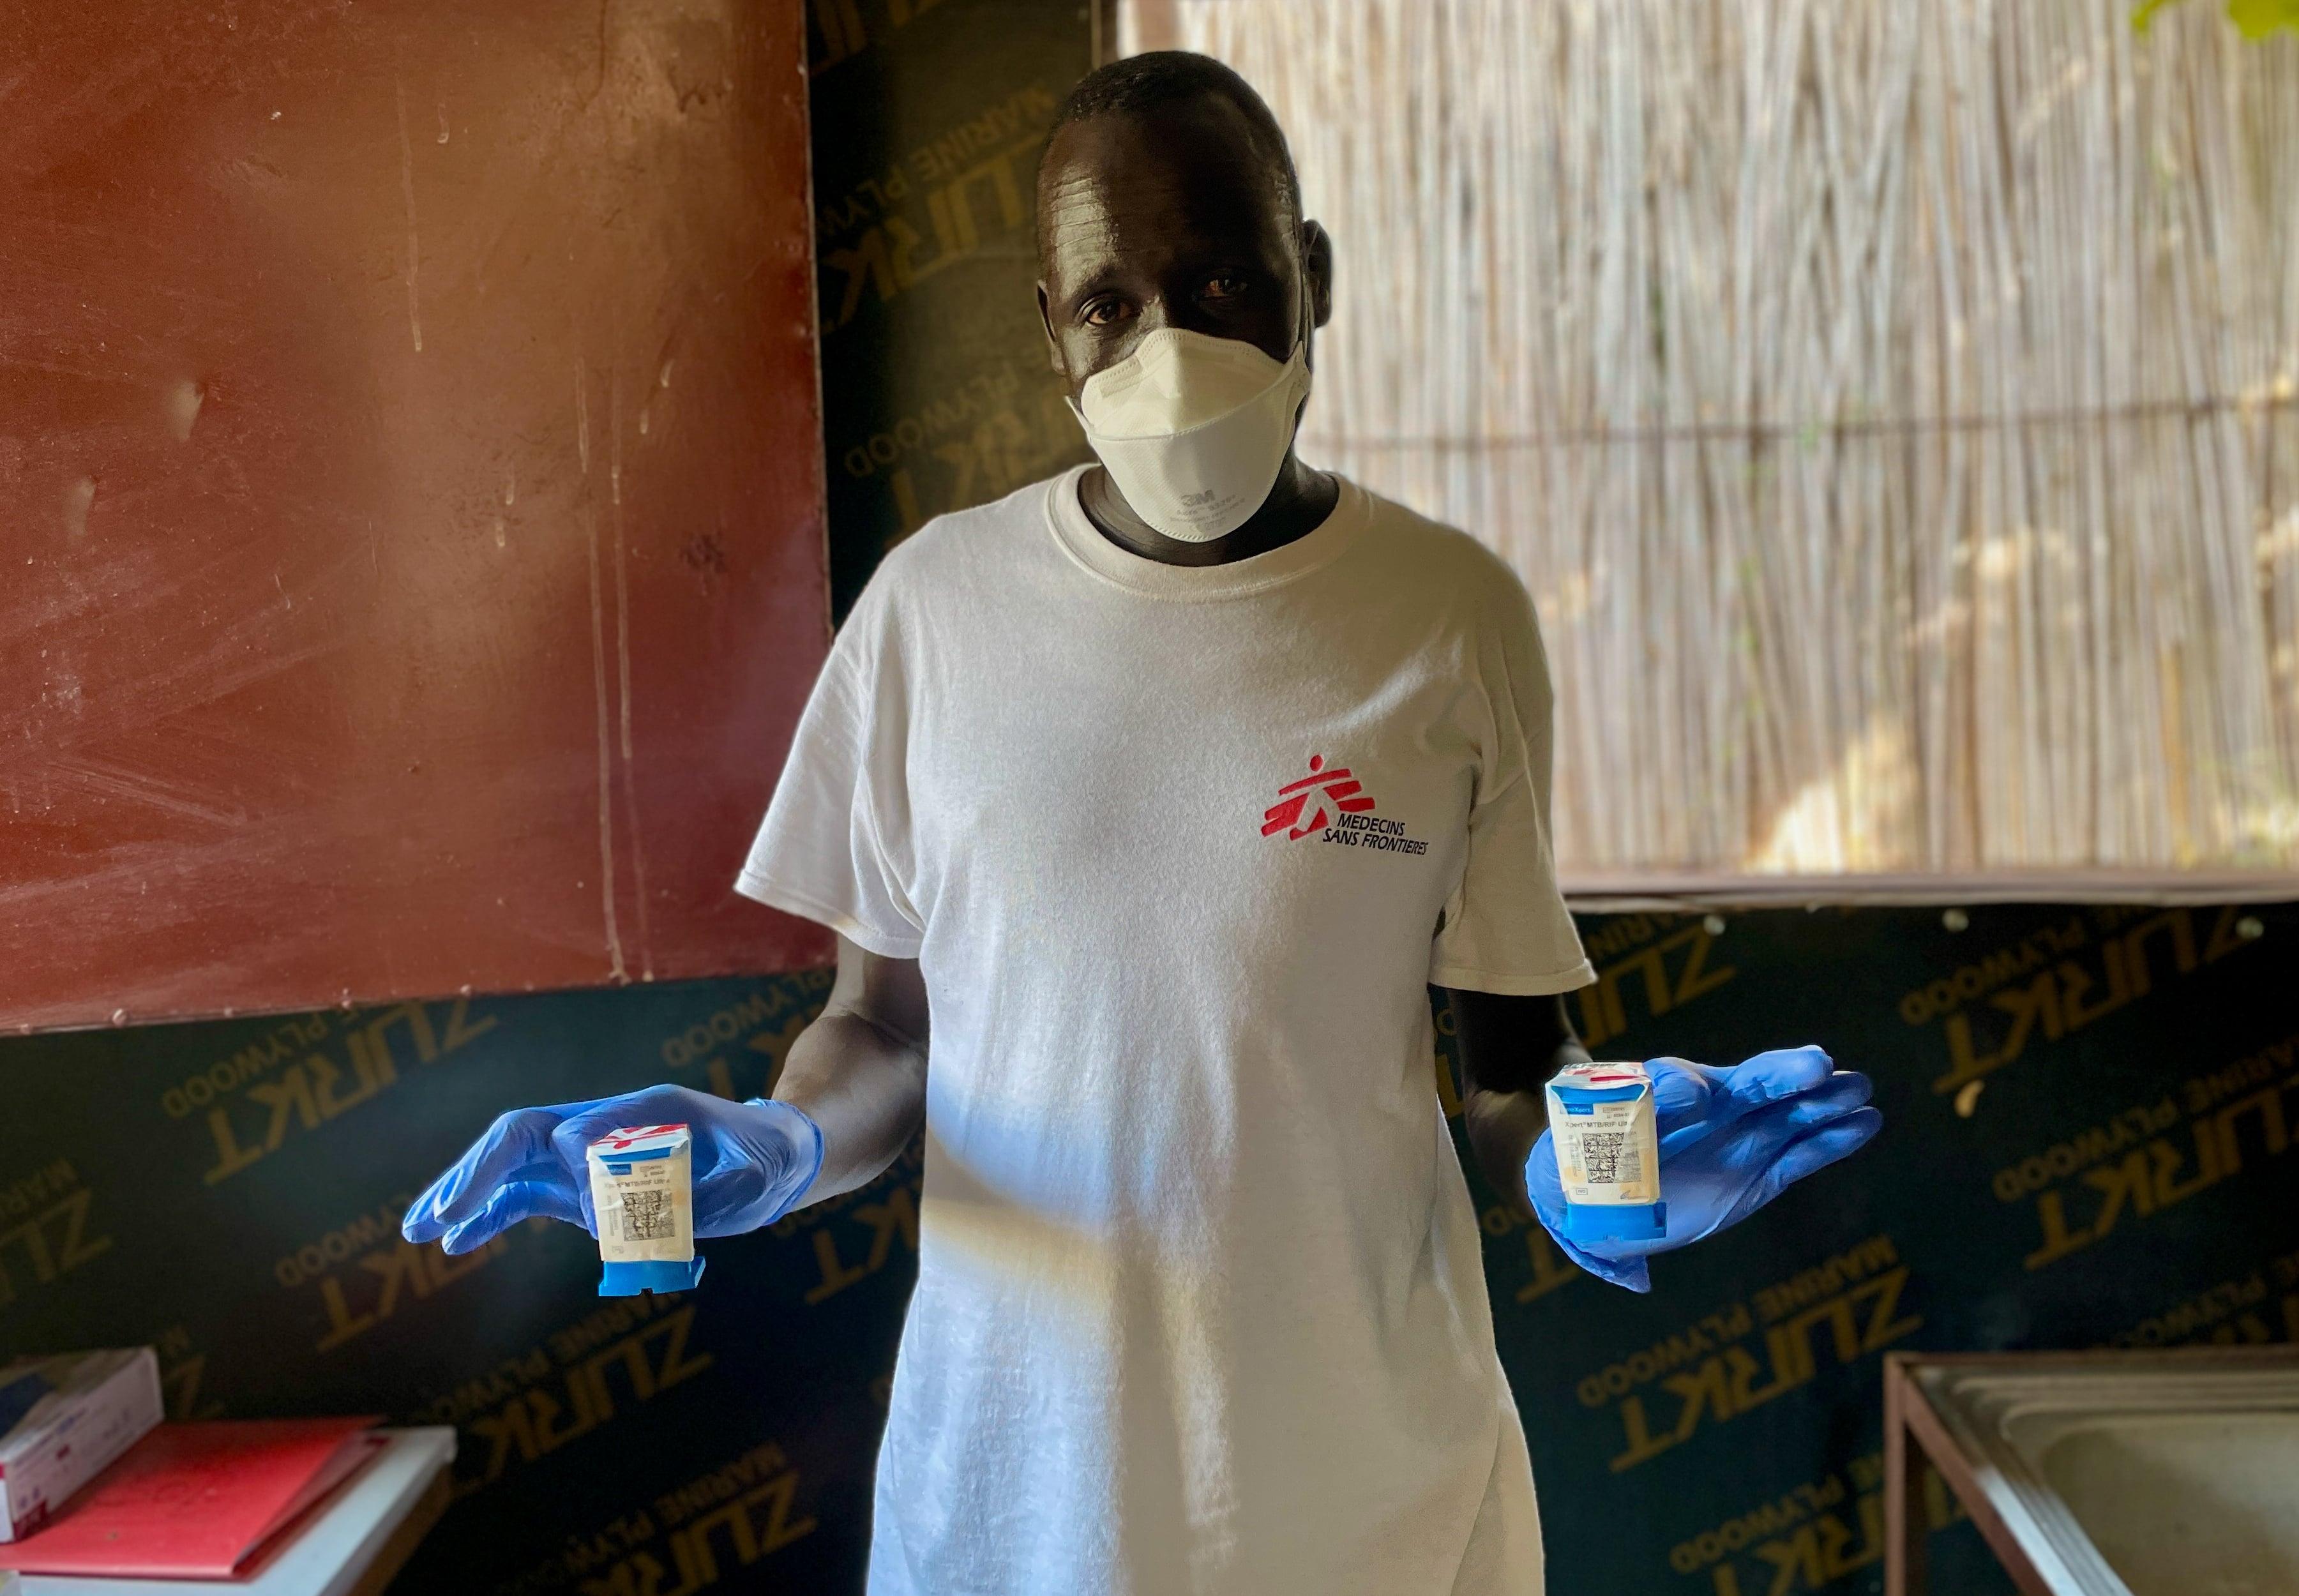 Life-saving genexpert: Wengo Chuol Mwon, laboratory supervisor in MSF hospital in Leer, is showing some samples collected to diagnose TB cases.